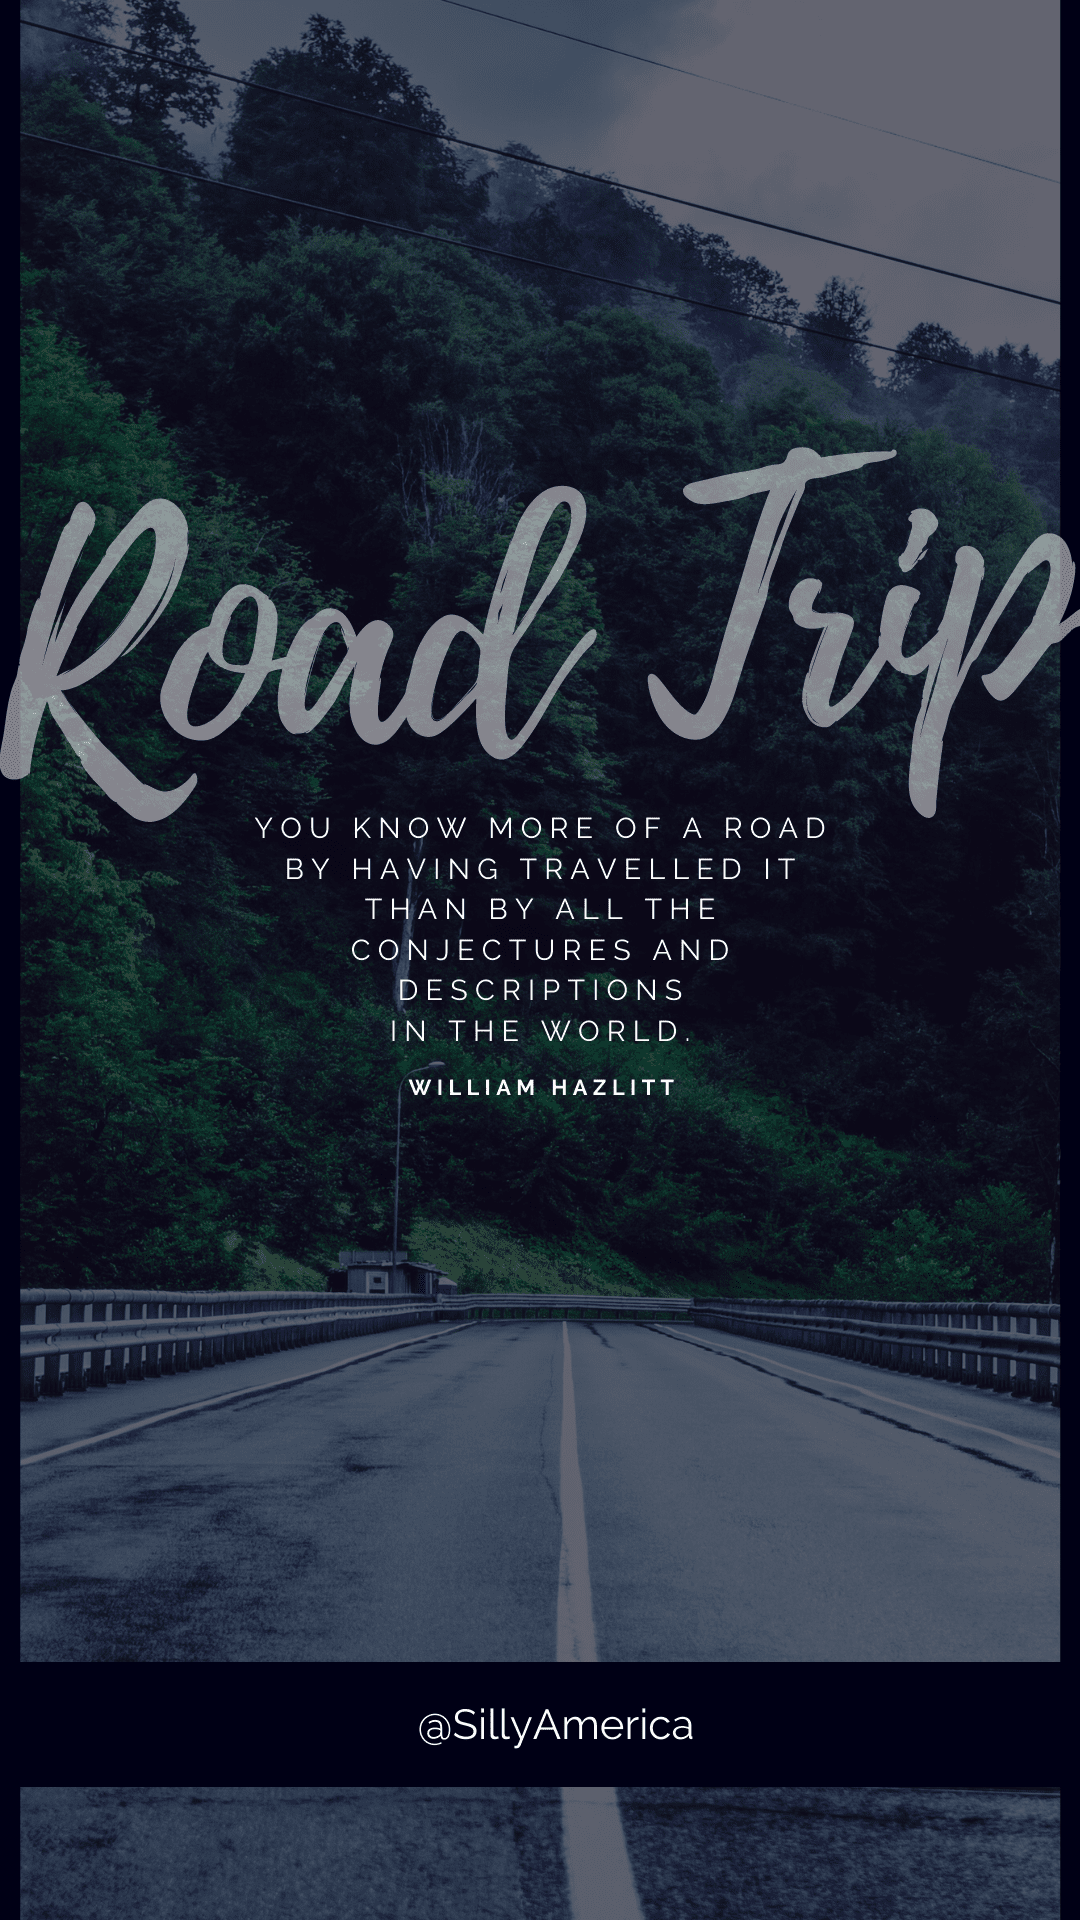 “You know more of a road by having travelled it than by all the conjectures and descriptions in the world.” William Hazlitt, On The Conduct of Life